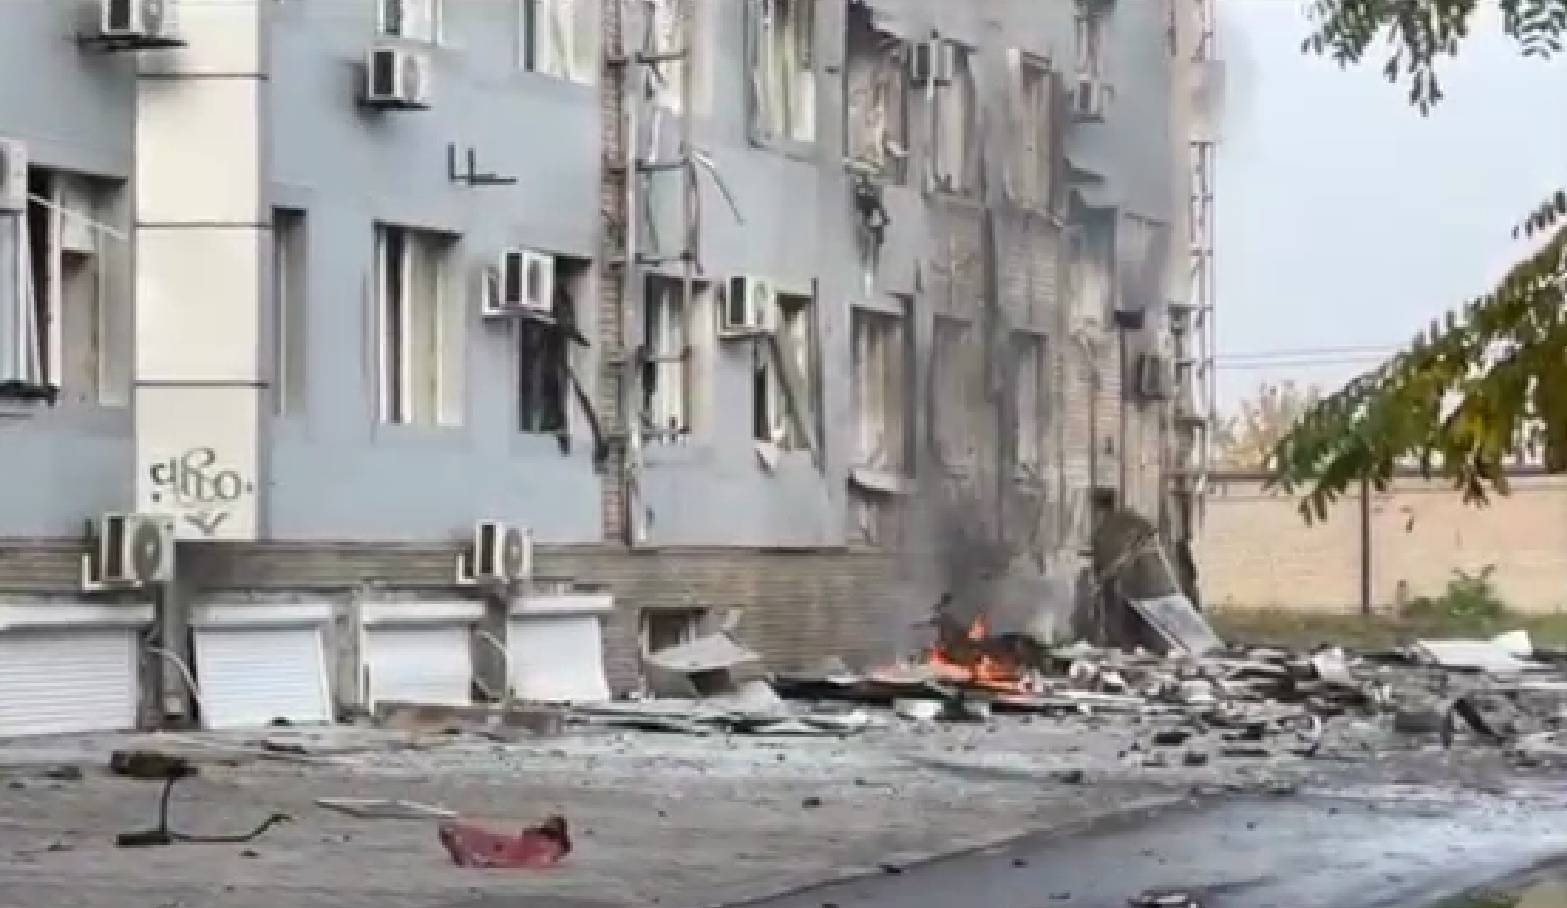 A frame from a video clip shows the explosion site near the office building of 